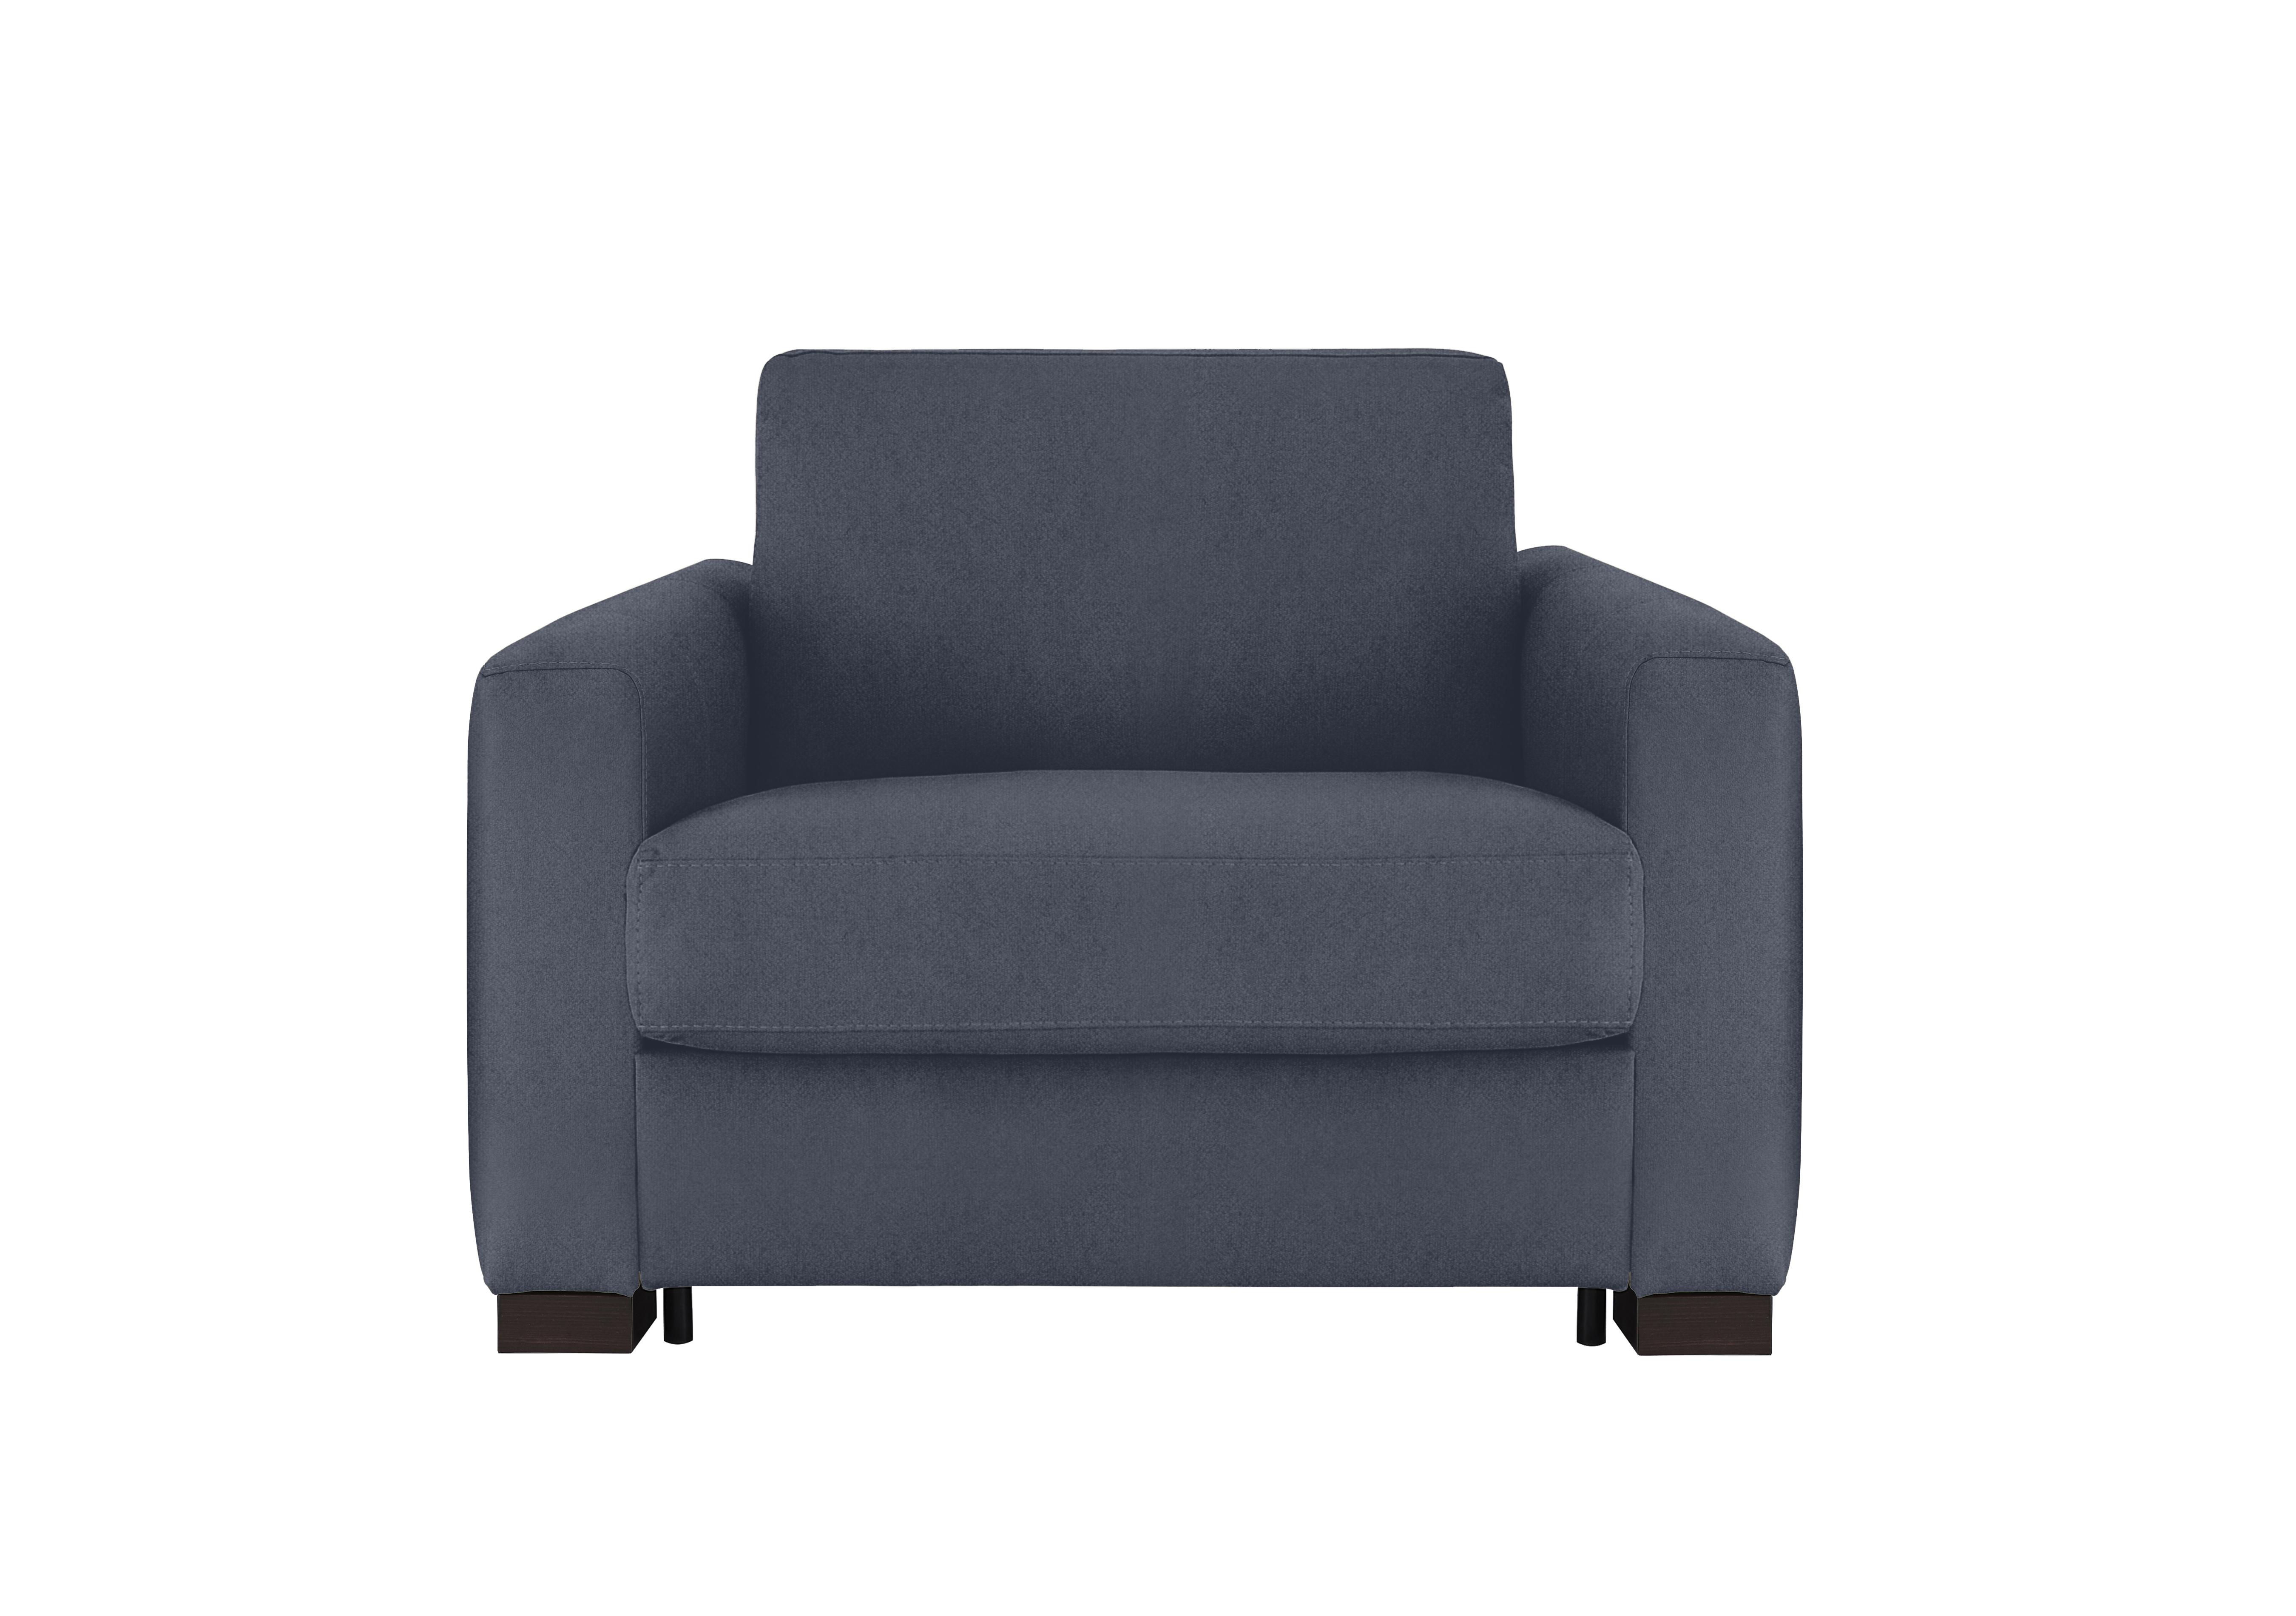 Alcova Fabric Chair Sofa Bed with Box Arms in Fuente Ocean on Furniture Village